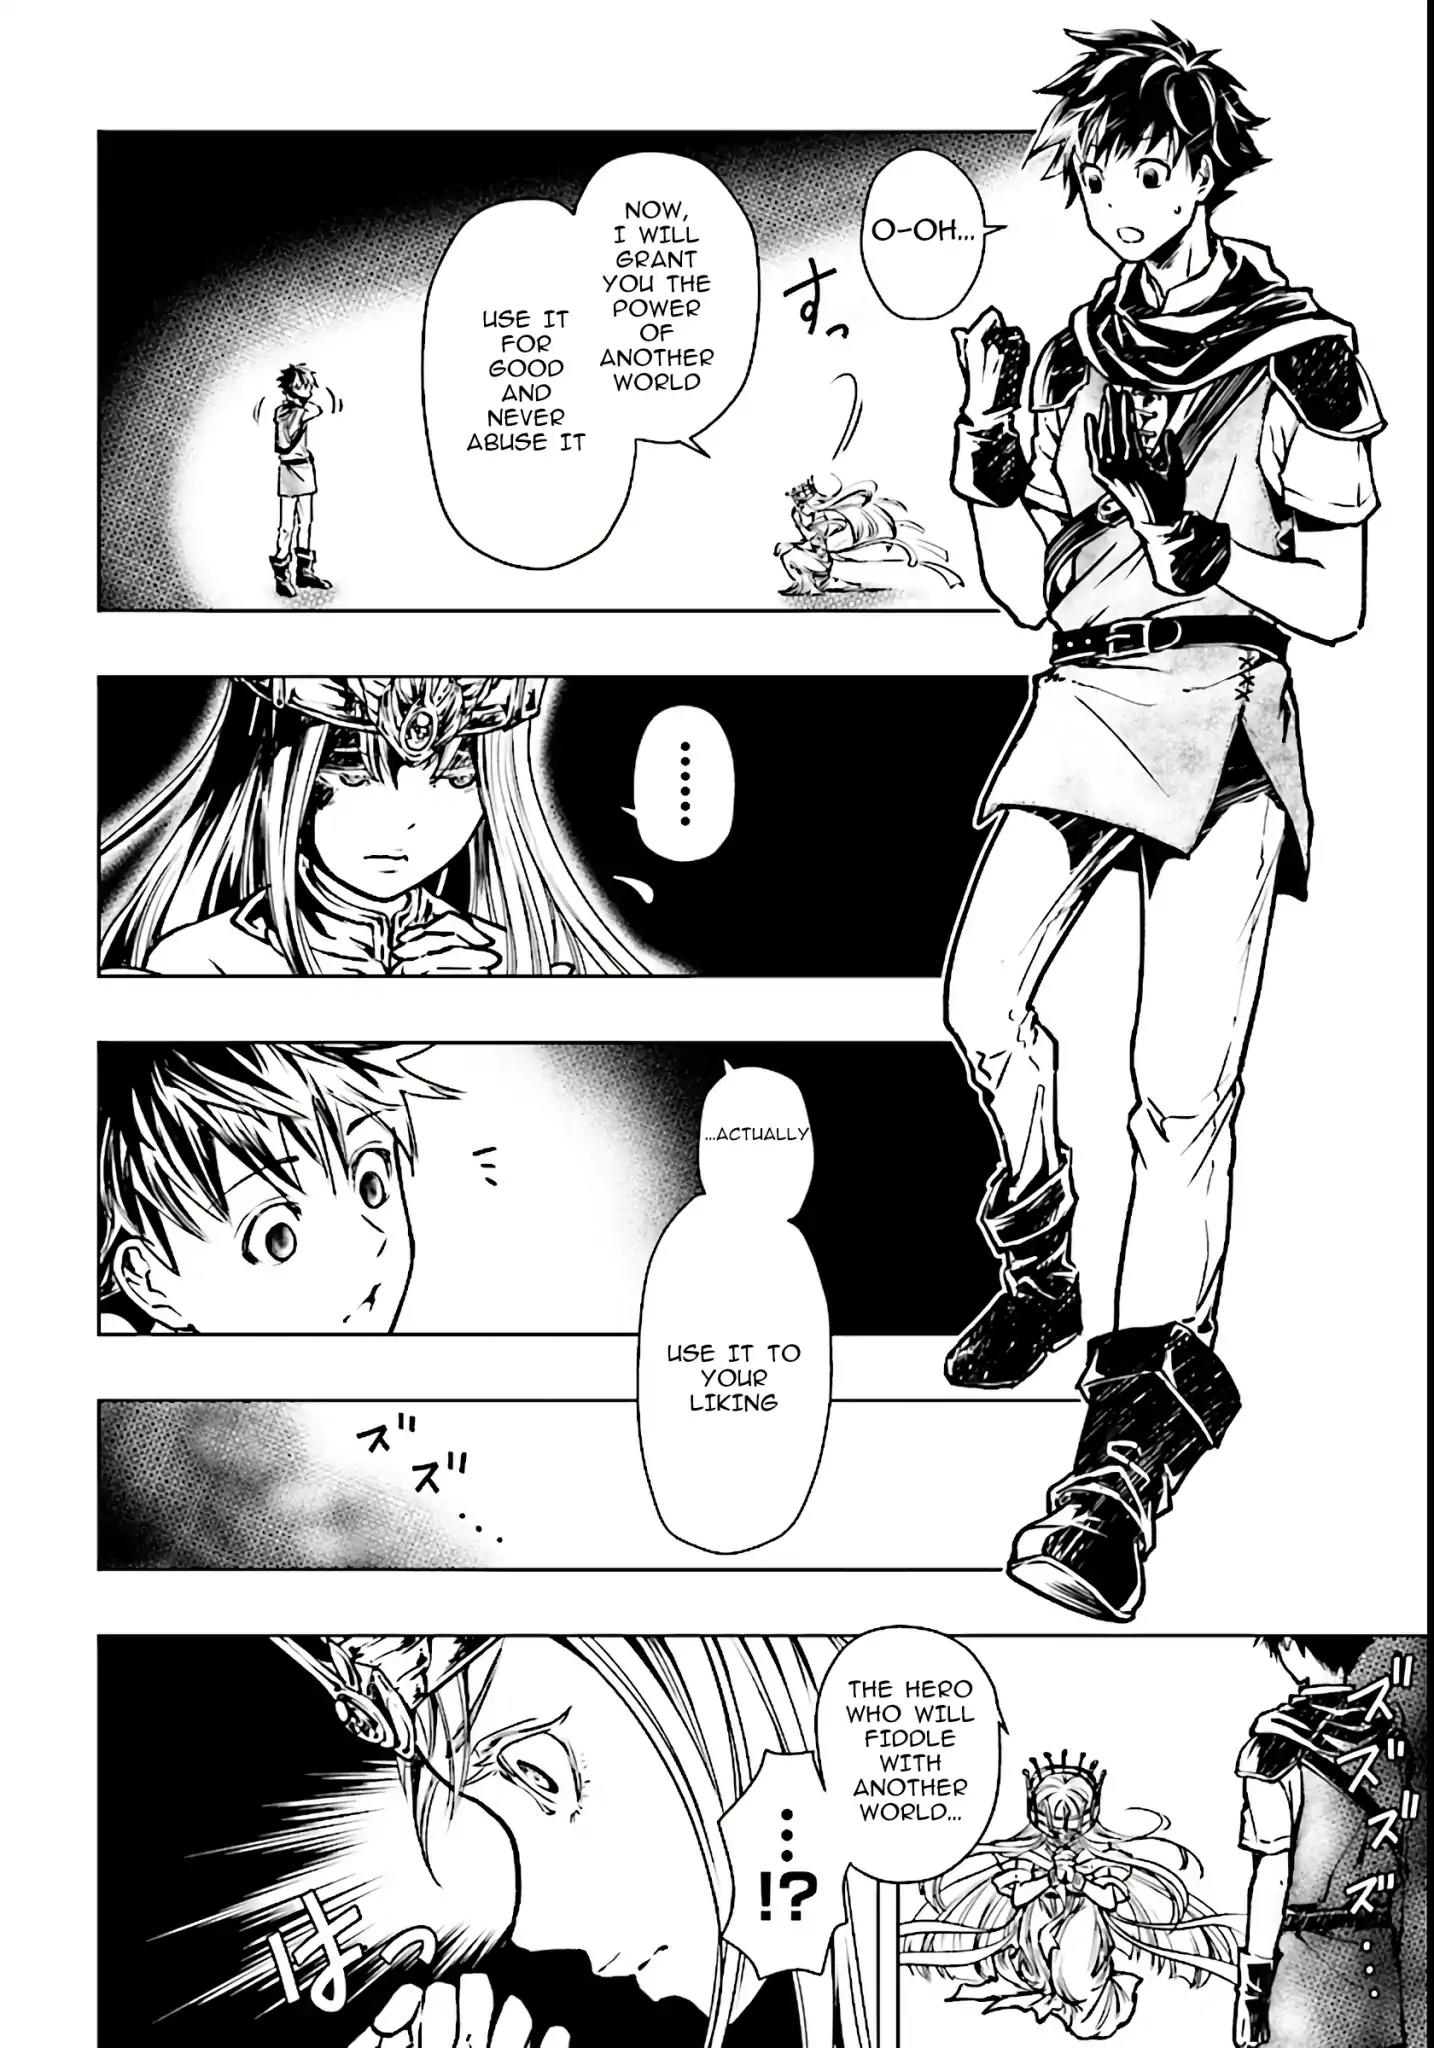 The Deadly Game of Hero From Another World Vol.1 Chapter 1: